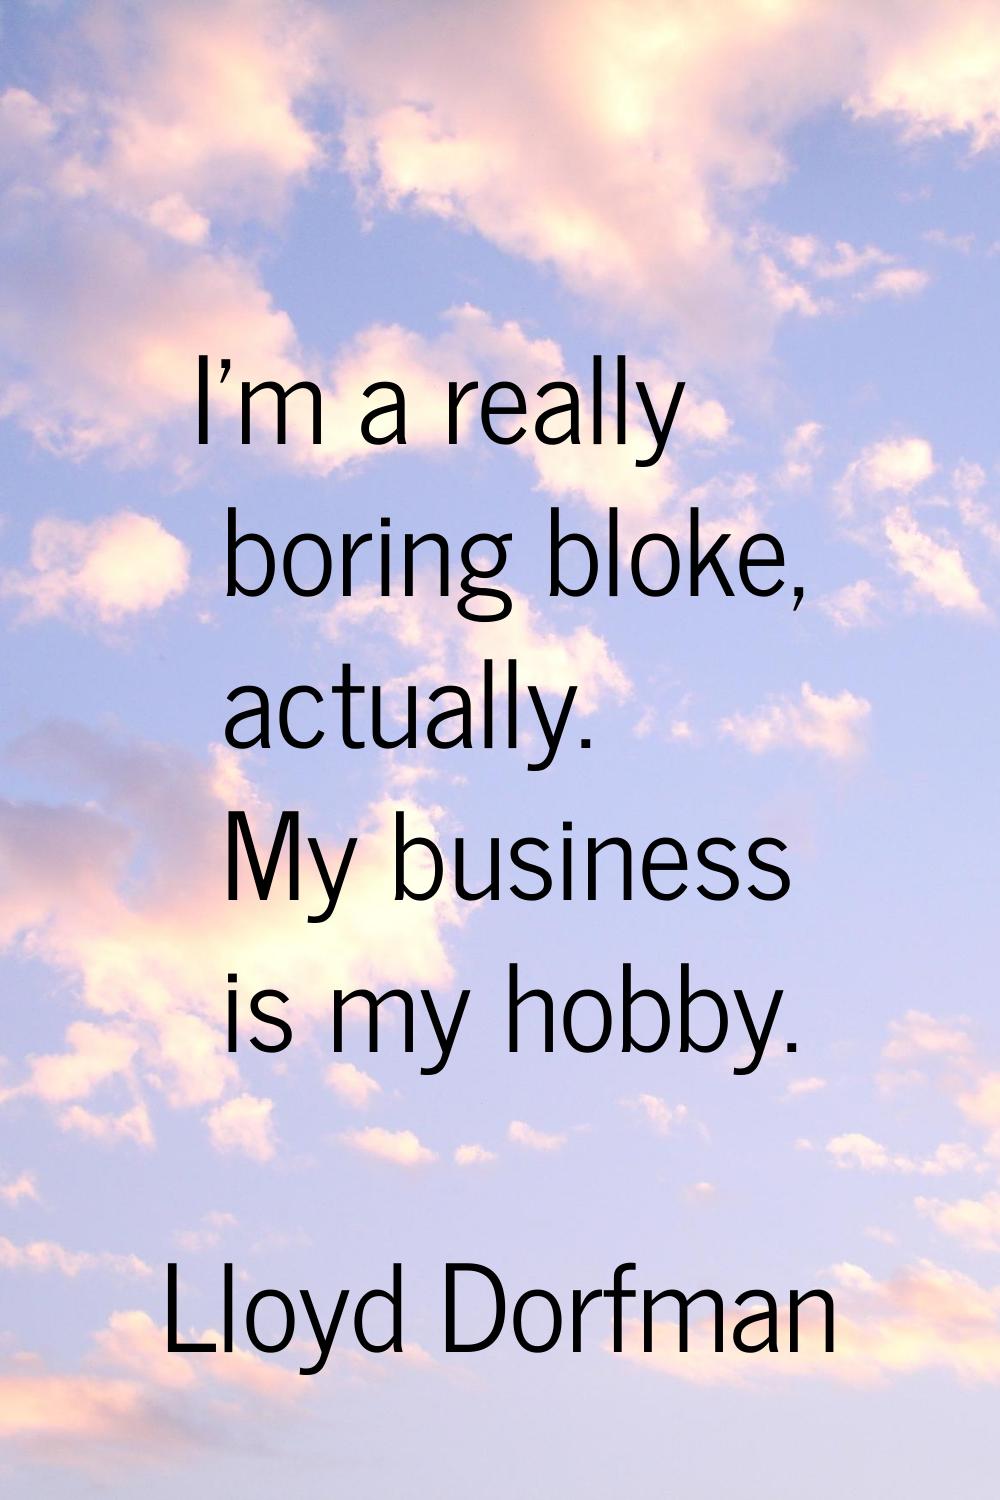 I'm a really boring bloke, actually. My business is my hobby.